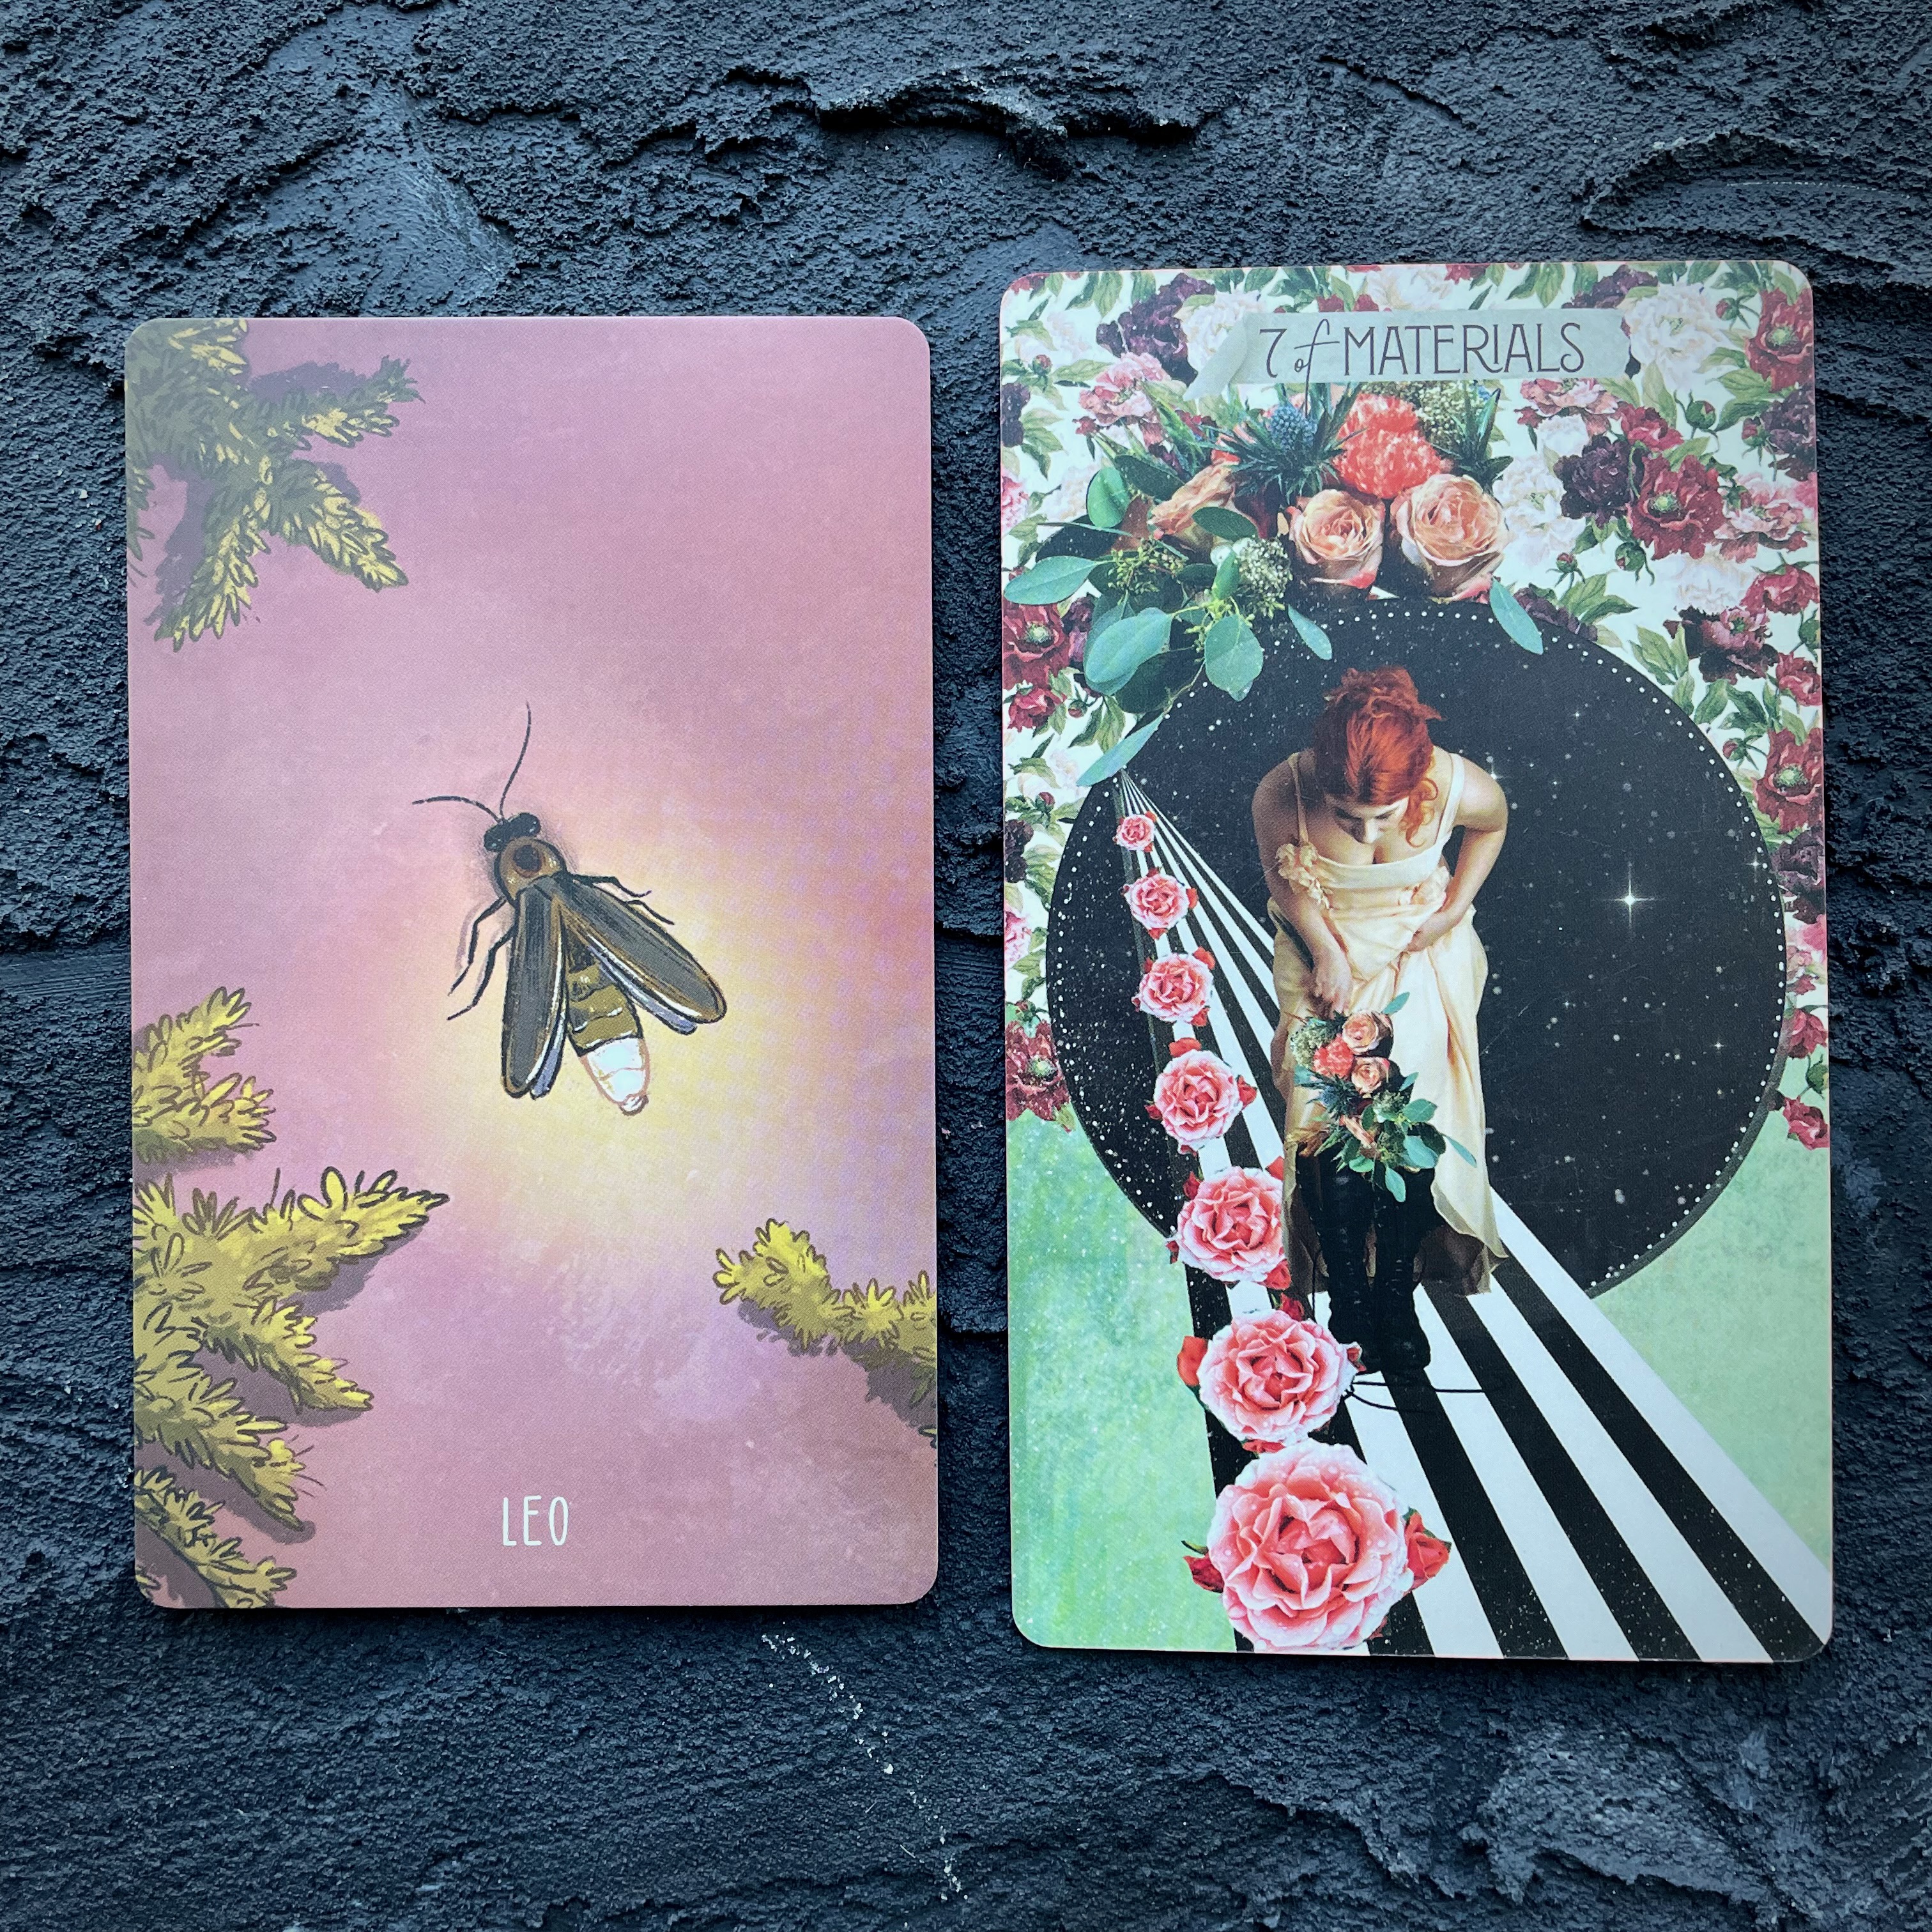 Two cards in front of a navy blue background, right to left: Leo (a bee) and 7 of Materials (a woman with roses collaged on a black and white stripped road with flowers everywhere)